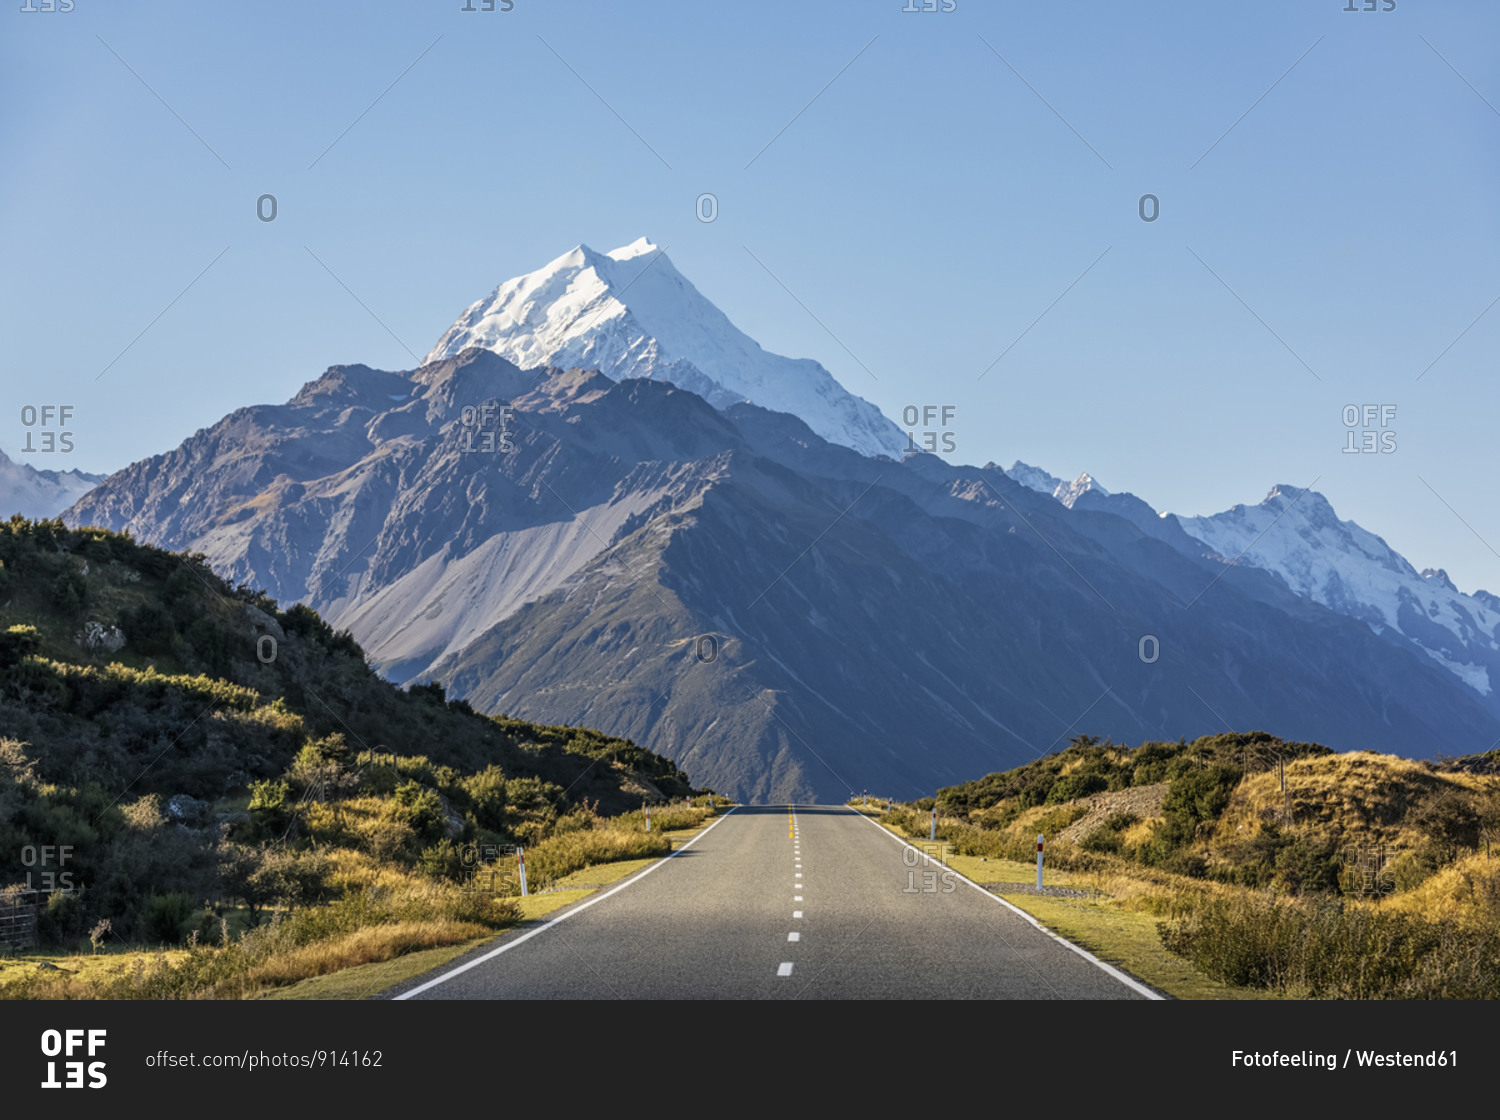 New Zealand- Oceania- South Island- Canterbury- Ben Ohau- Southern Alps (New Zealand Alps)- Mount Cook National Park- Mount Cook Road and Aoraki / Mount Cook- Empty road in mountain landscape